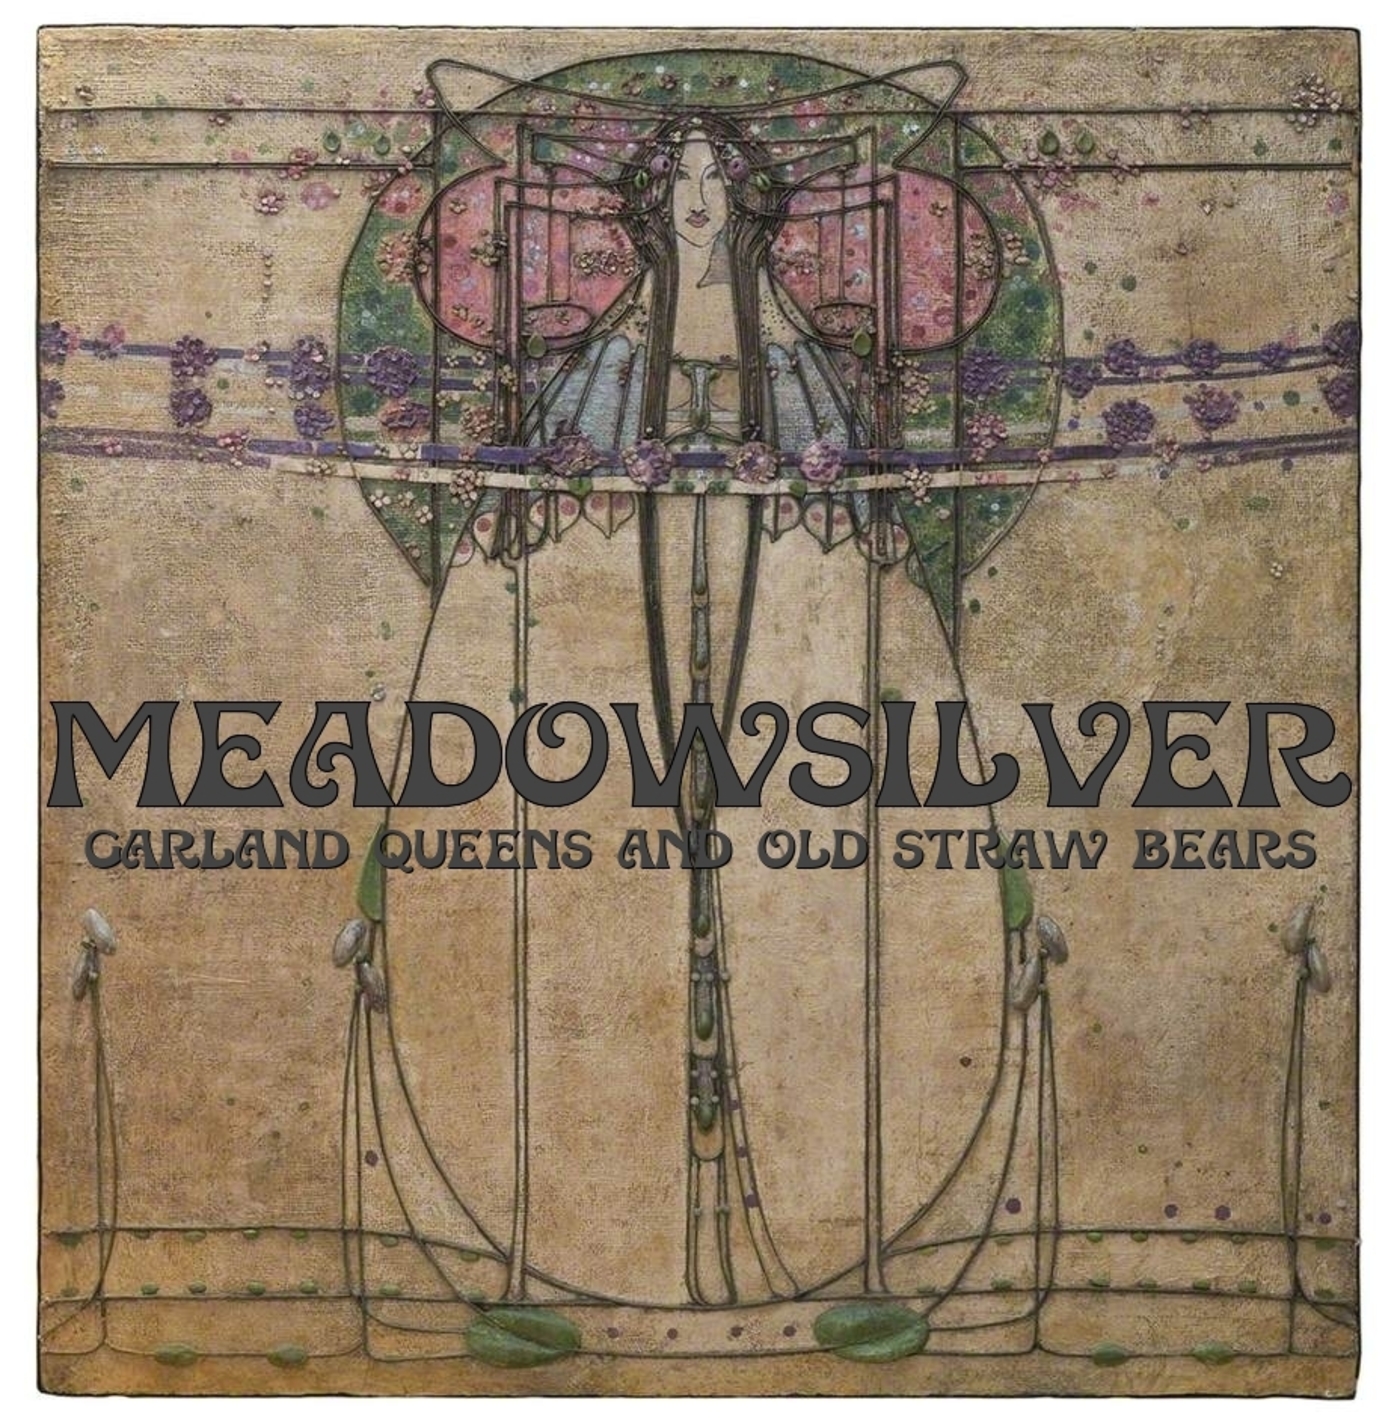 Meadowsilver Garland Queens and Old Straw Bears